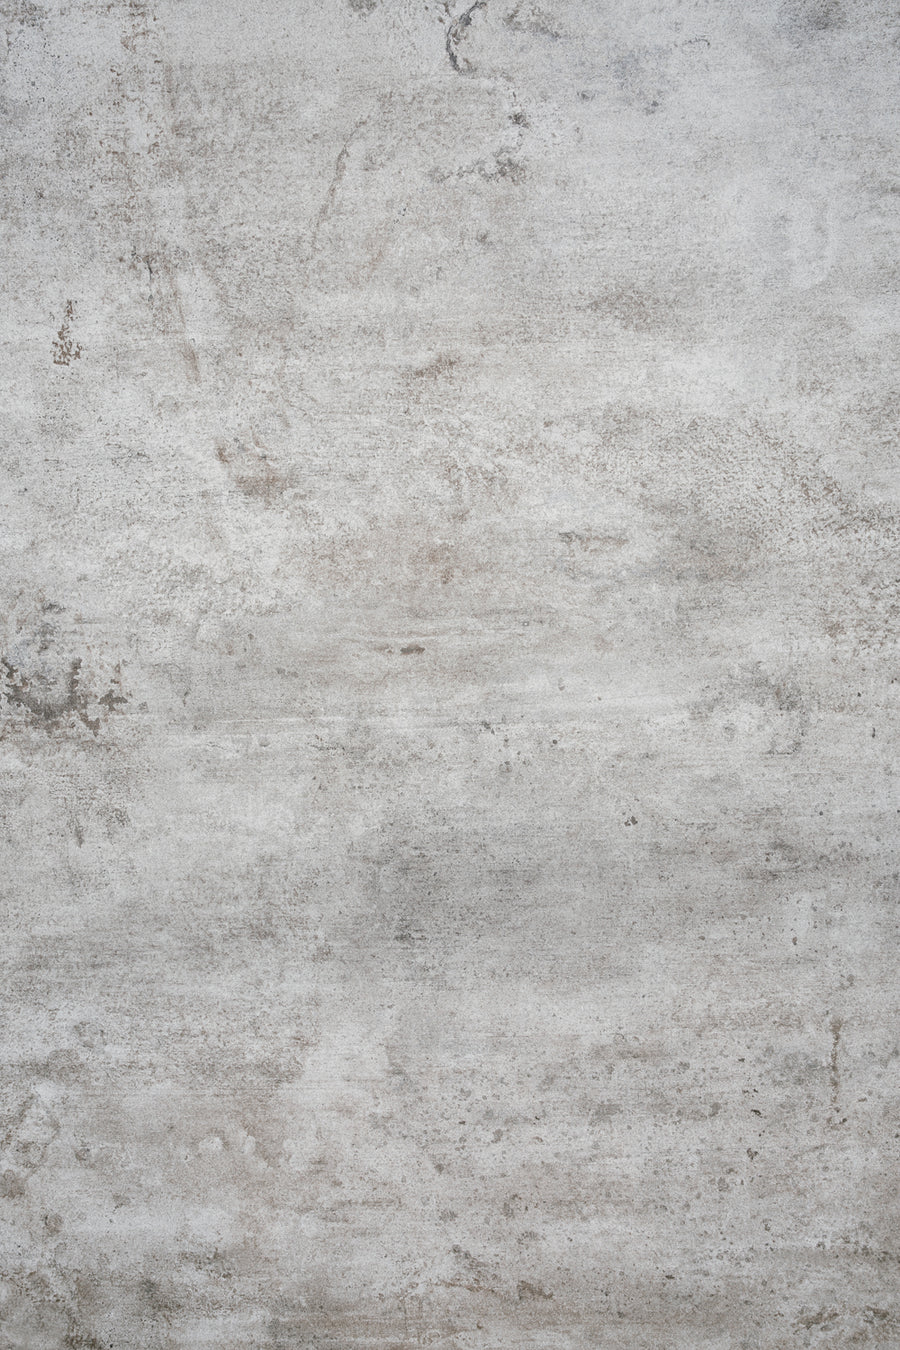 Warm gray rustic stone photography surface